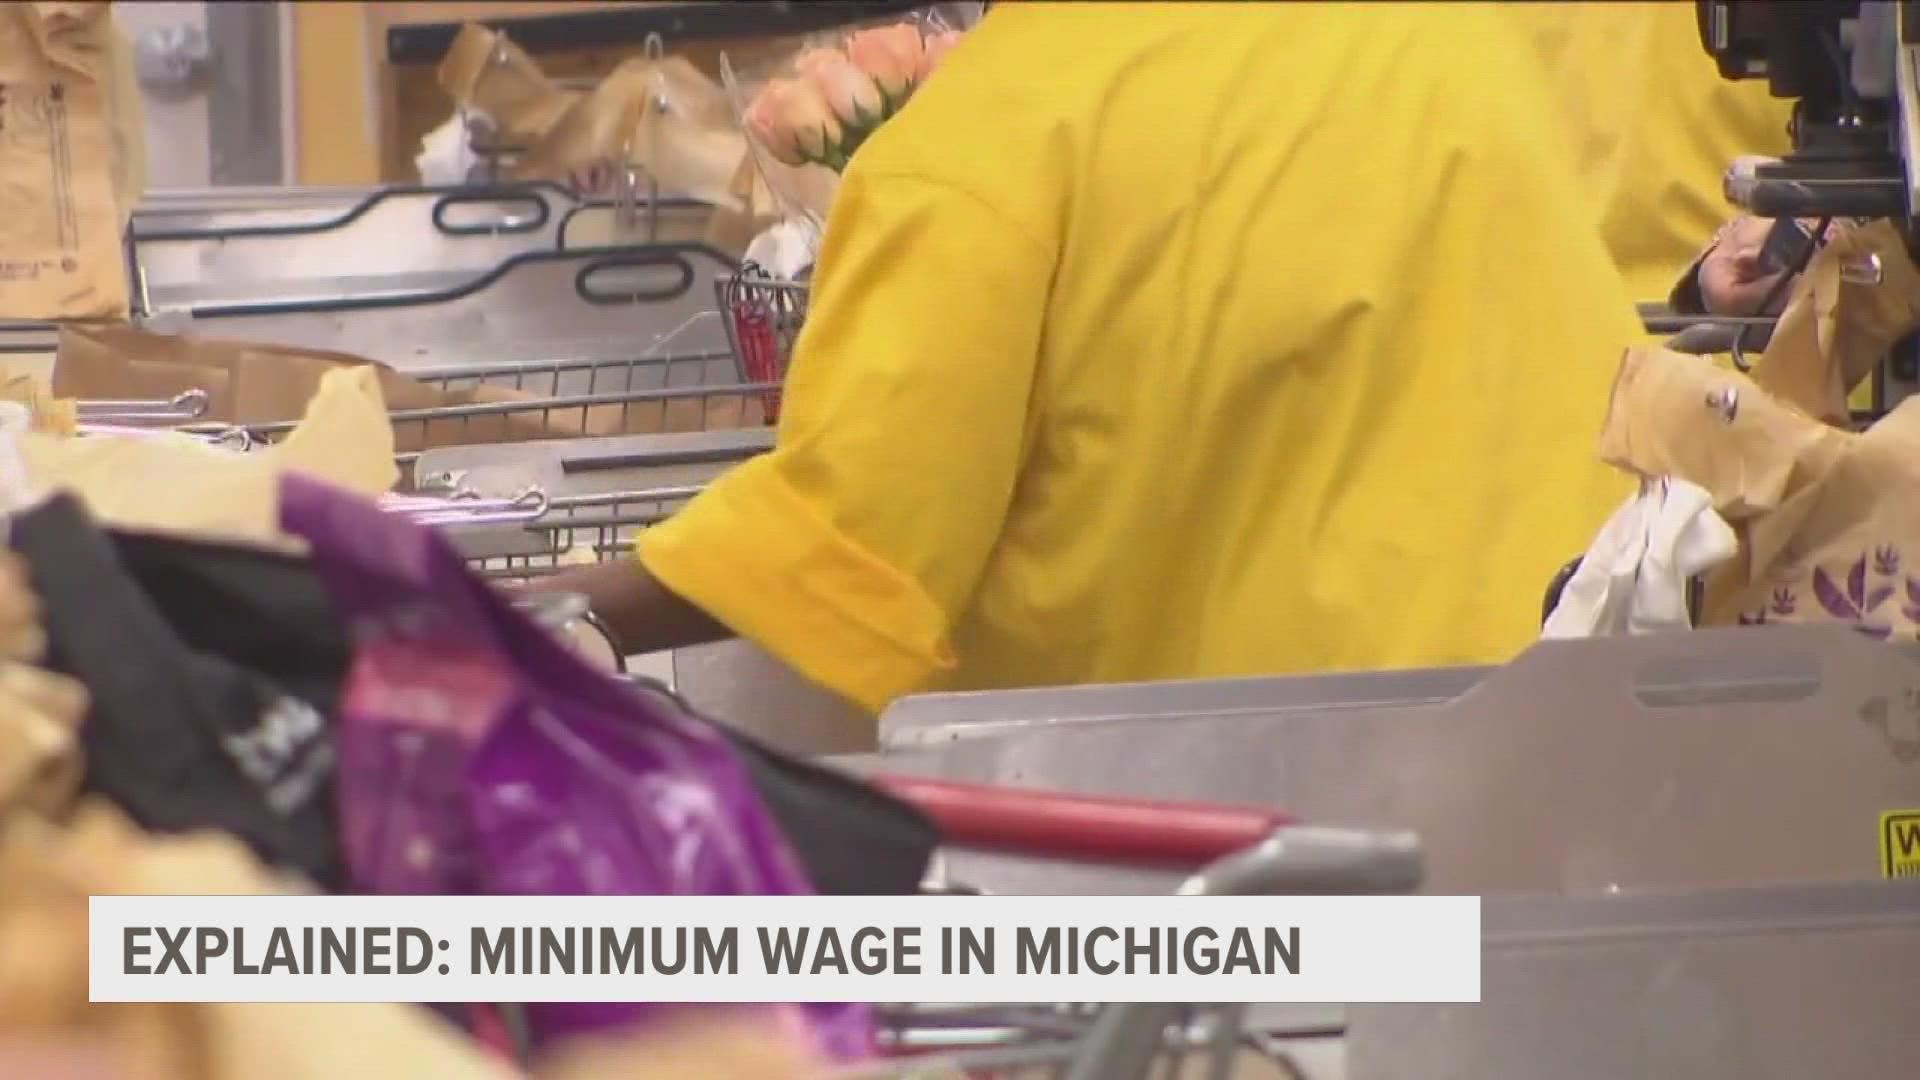 At the start of the new year, Michigan's minimum wage increased from $9.87 to $10.10 per hour, but that increase could have been much higher.